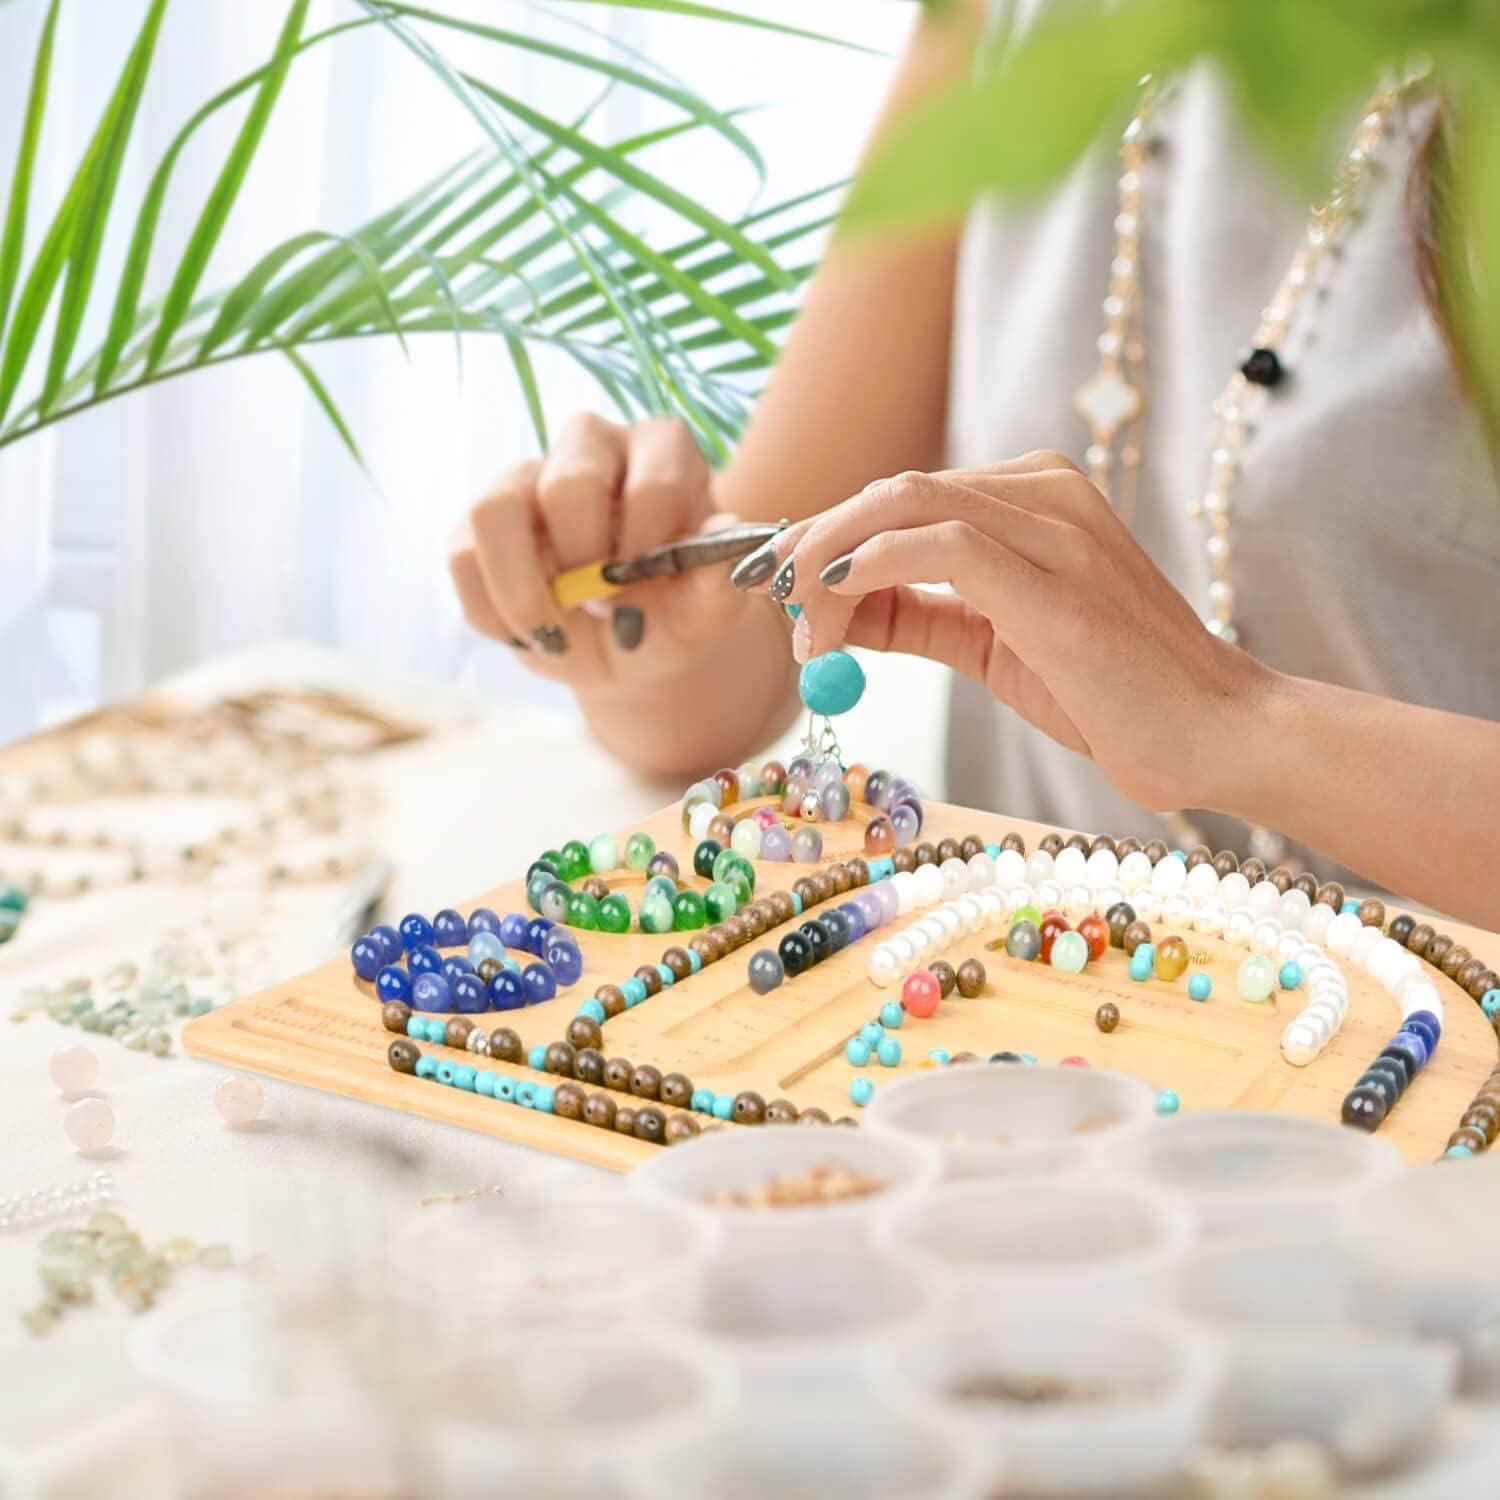 Make Your Own Bead Board / The Beading Gem